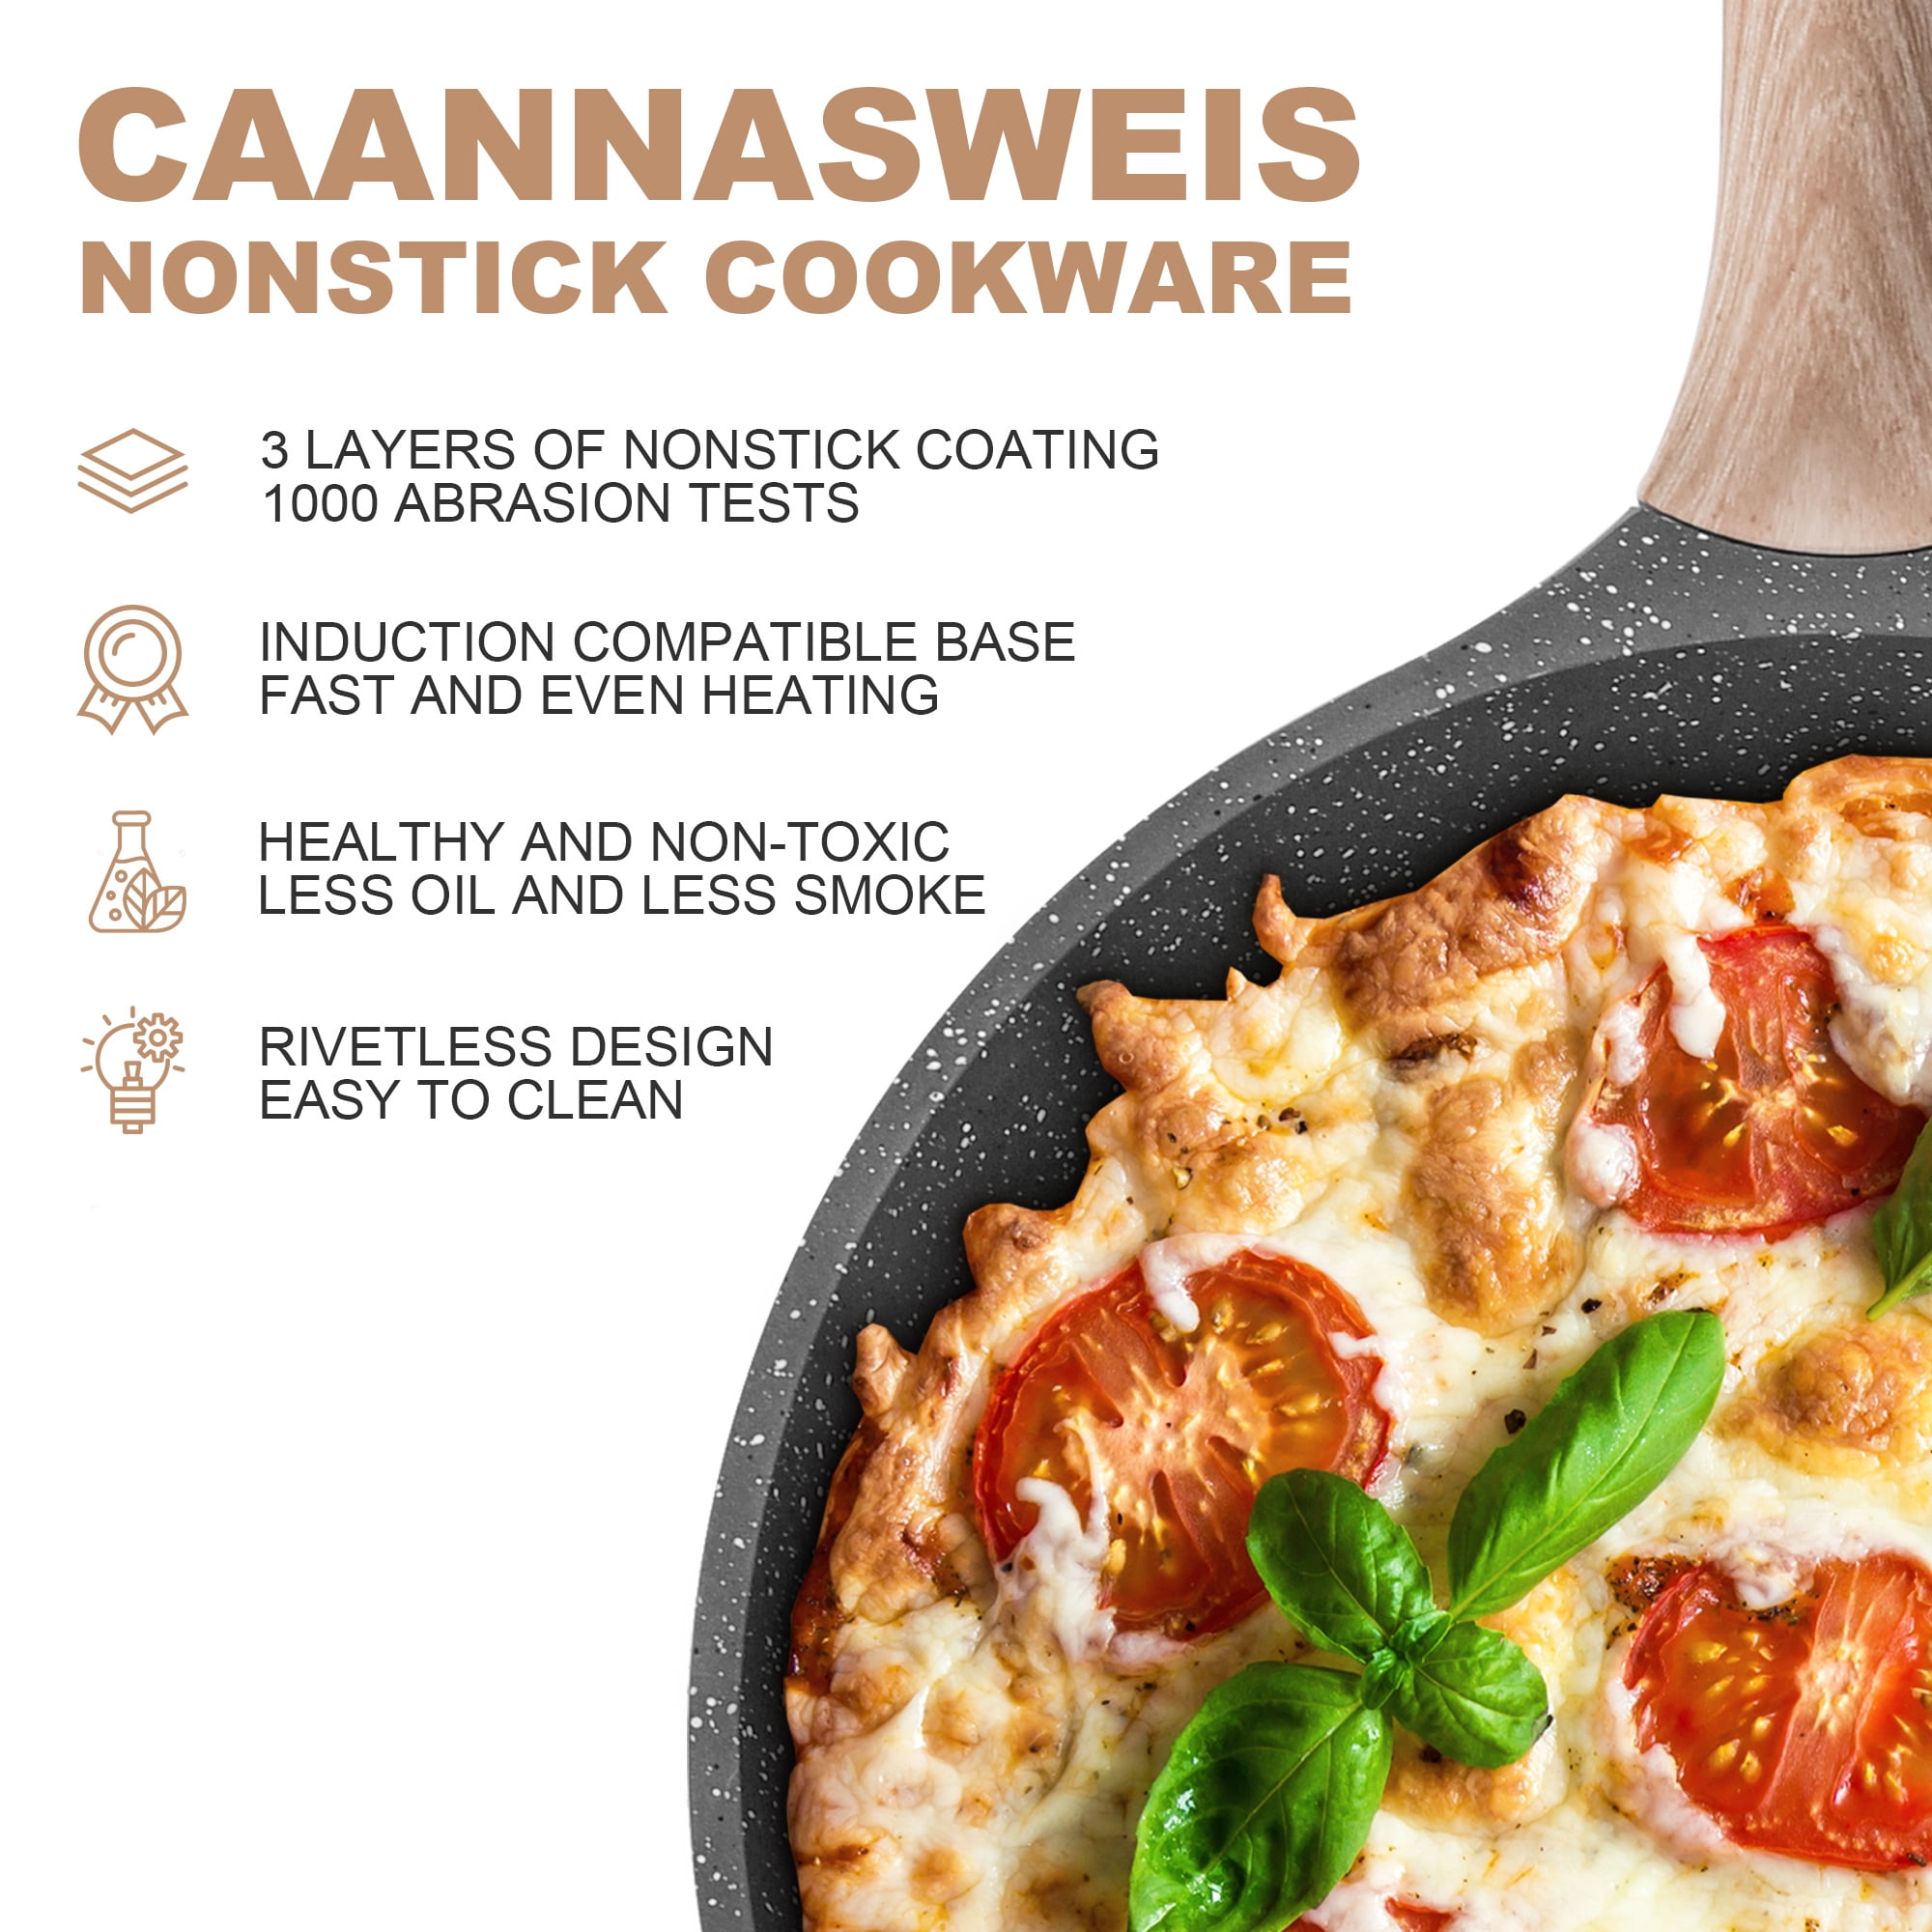 Caannasweis 8 Inch Nonstick Pan with Lid, Nonstick Stone Frying Pan, Best Nonstick  Omelette Skillet with Soft Touch Handle, Induction Compatible